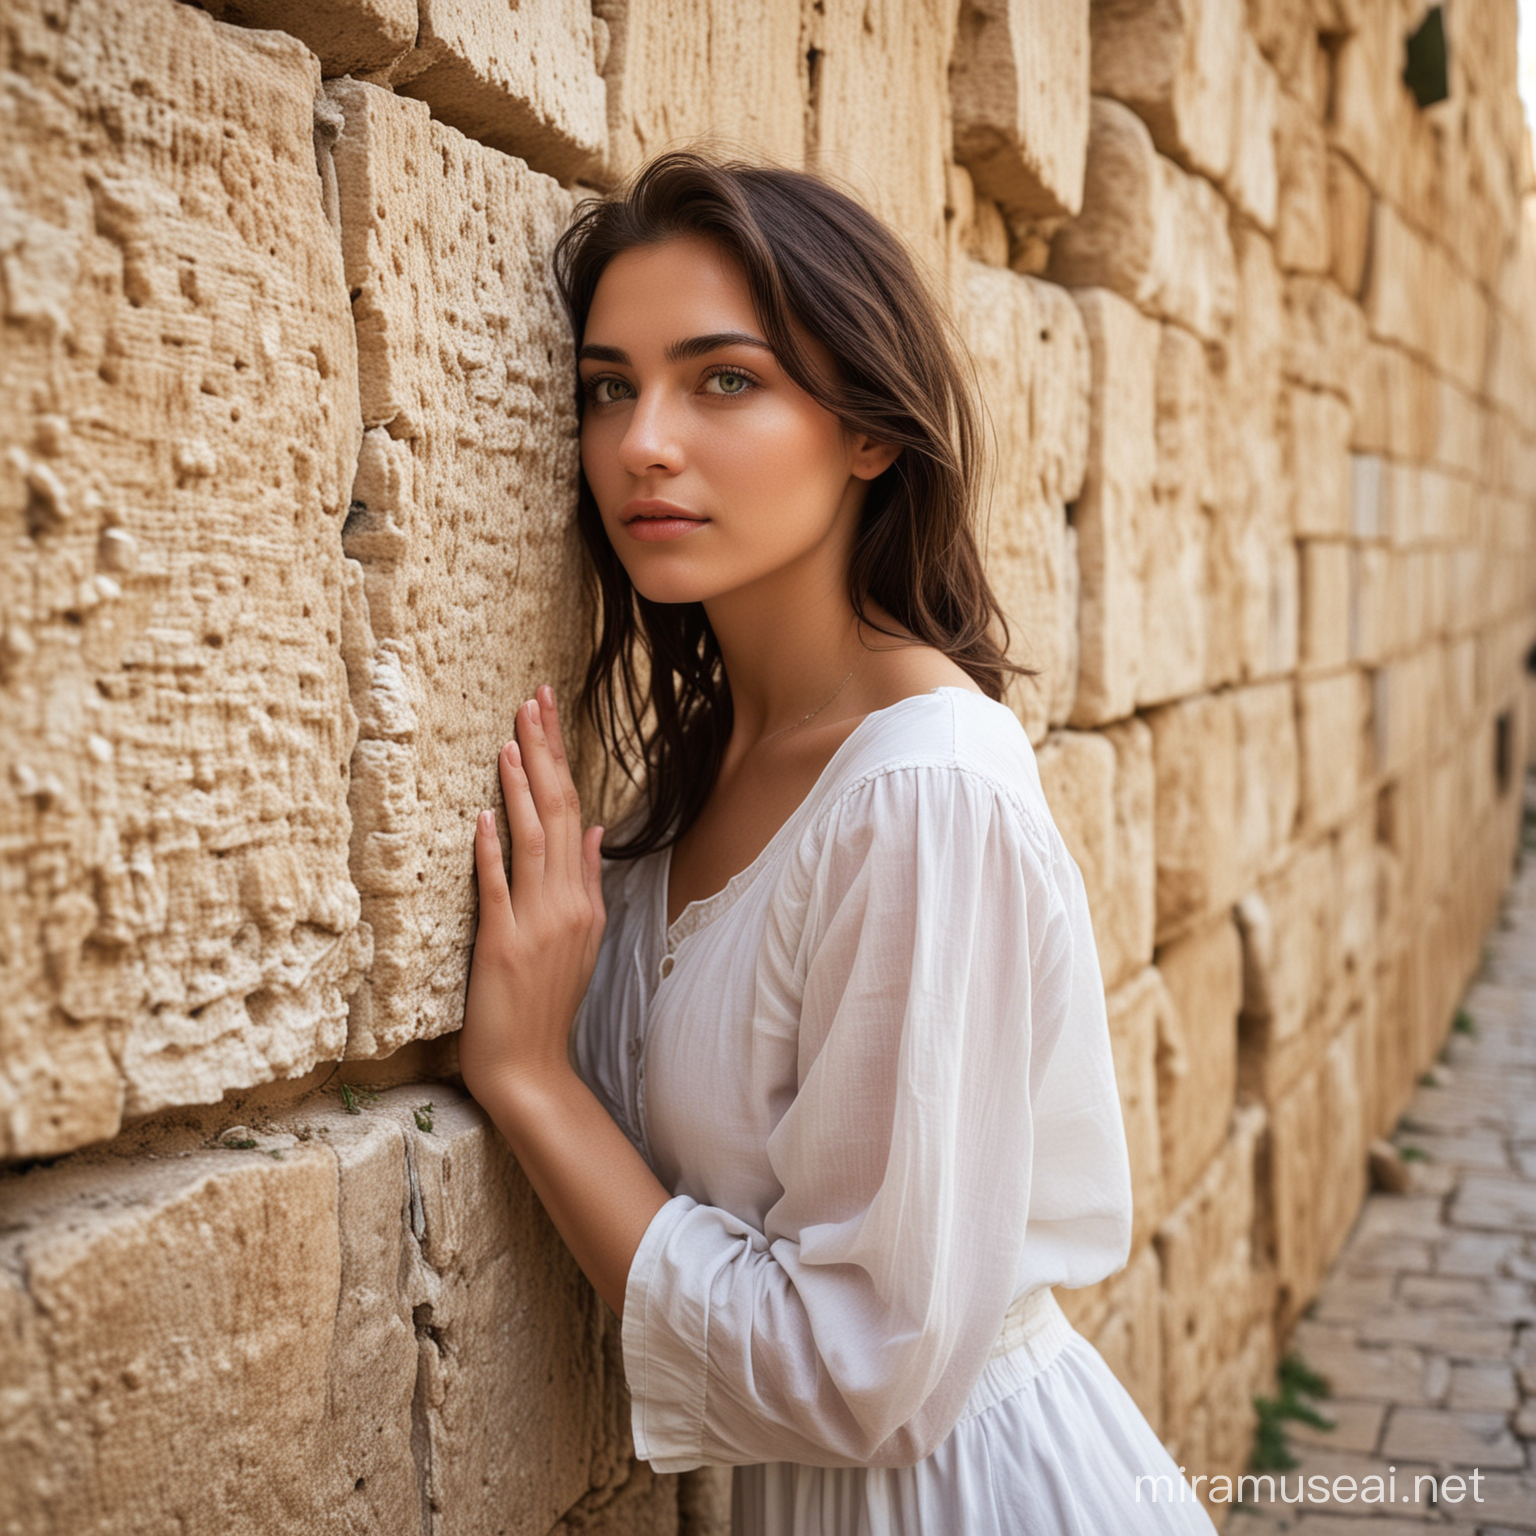 Young Model Praying at Western Wall Serene Reflections of Faith and History